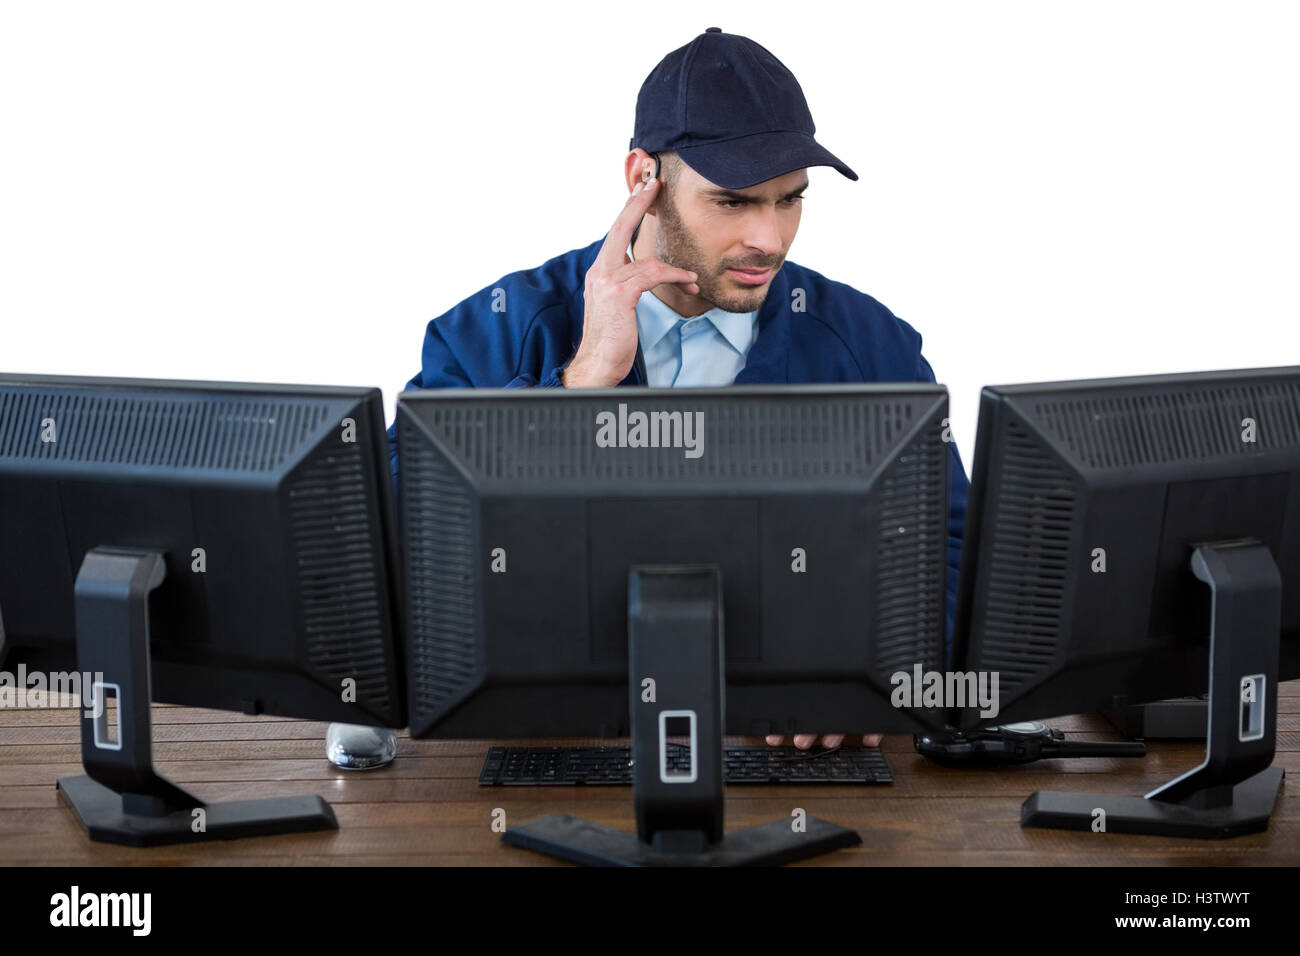 Security officer listening to earpiece while using computer Stock Photo